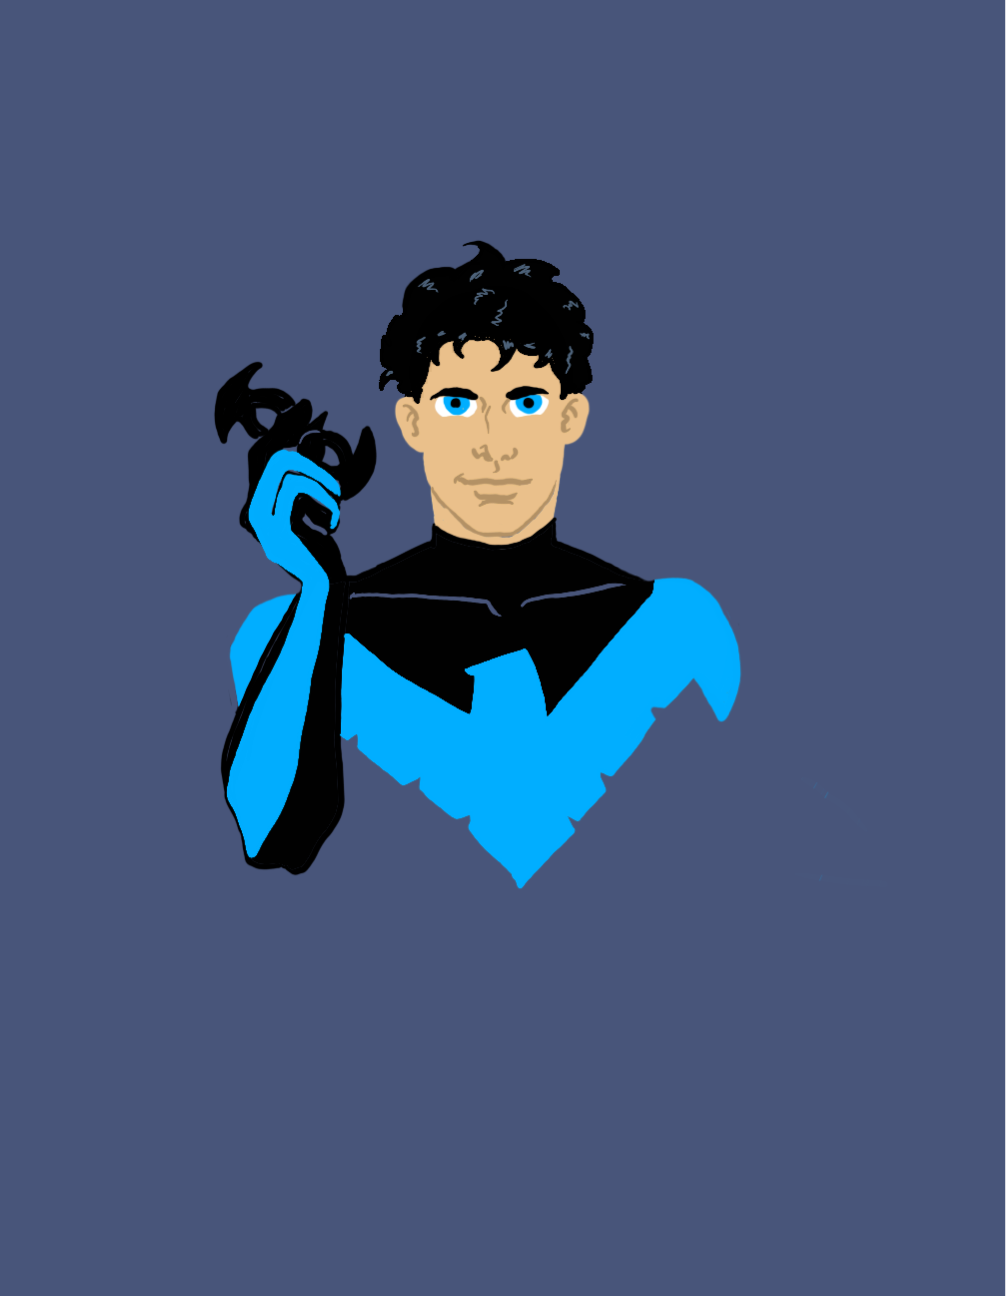 Nightwing going off-duty